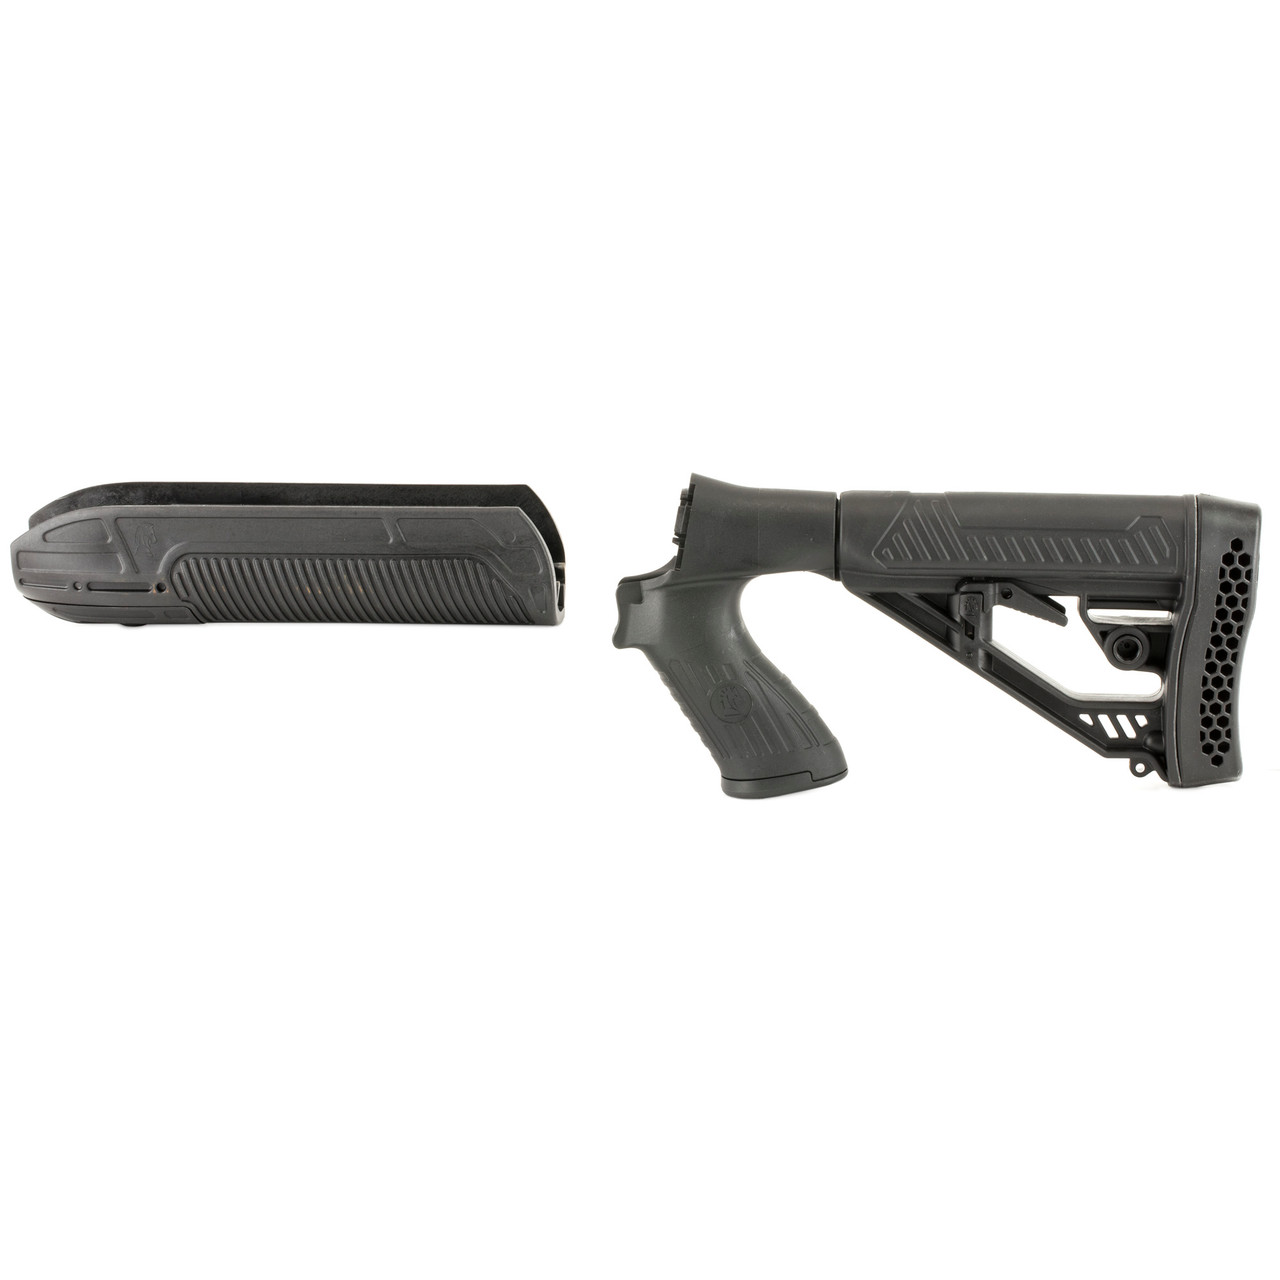 Adaptive Tactical Ex Stk & Fornd Moss 500 12g